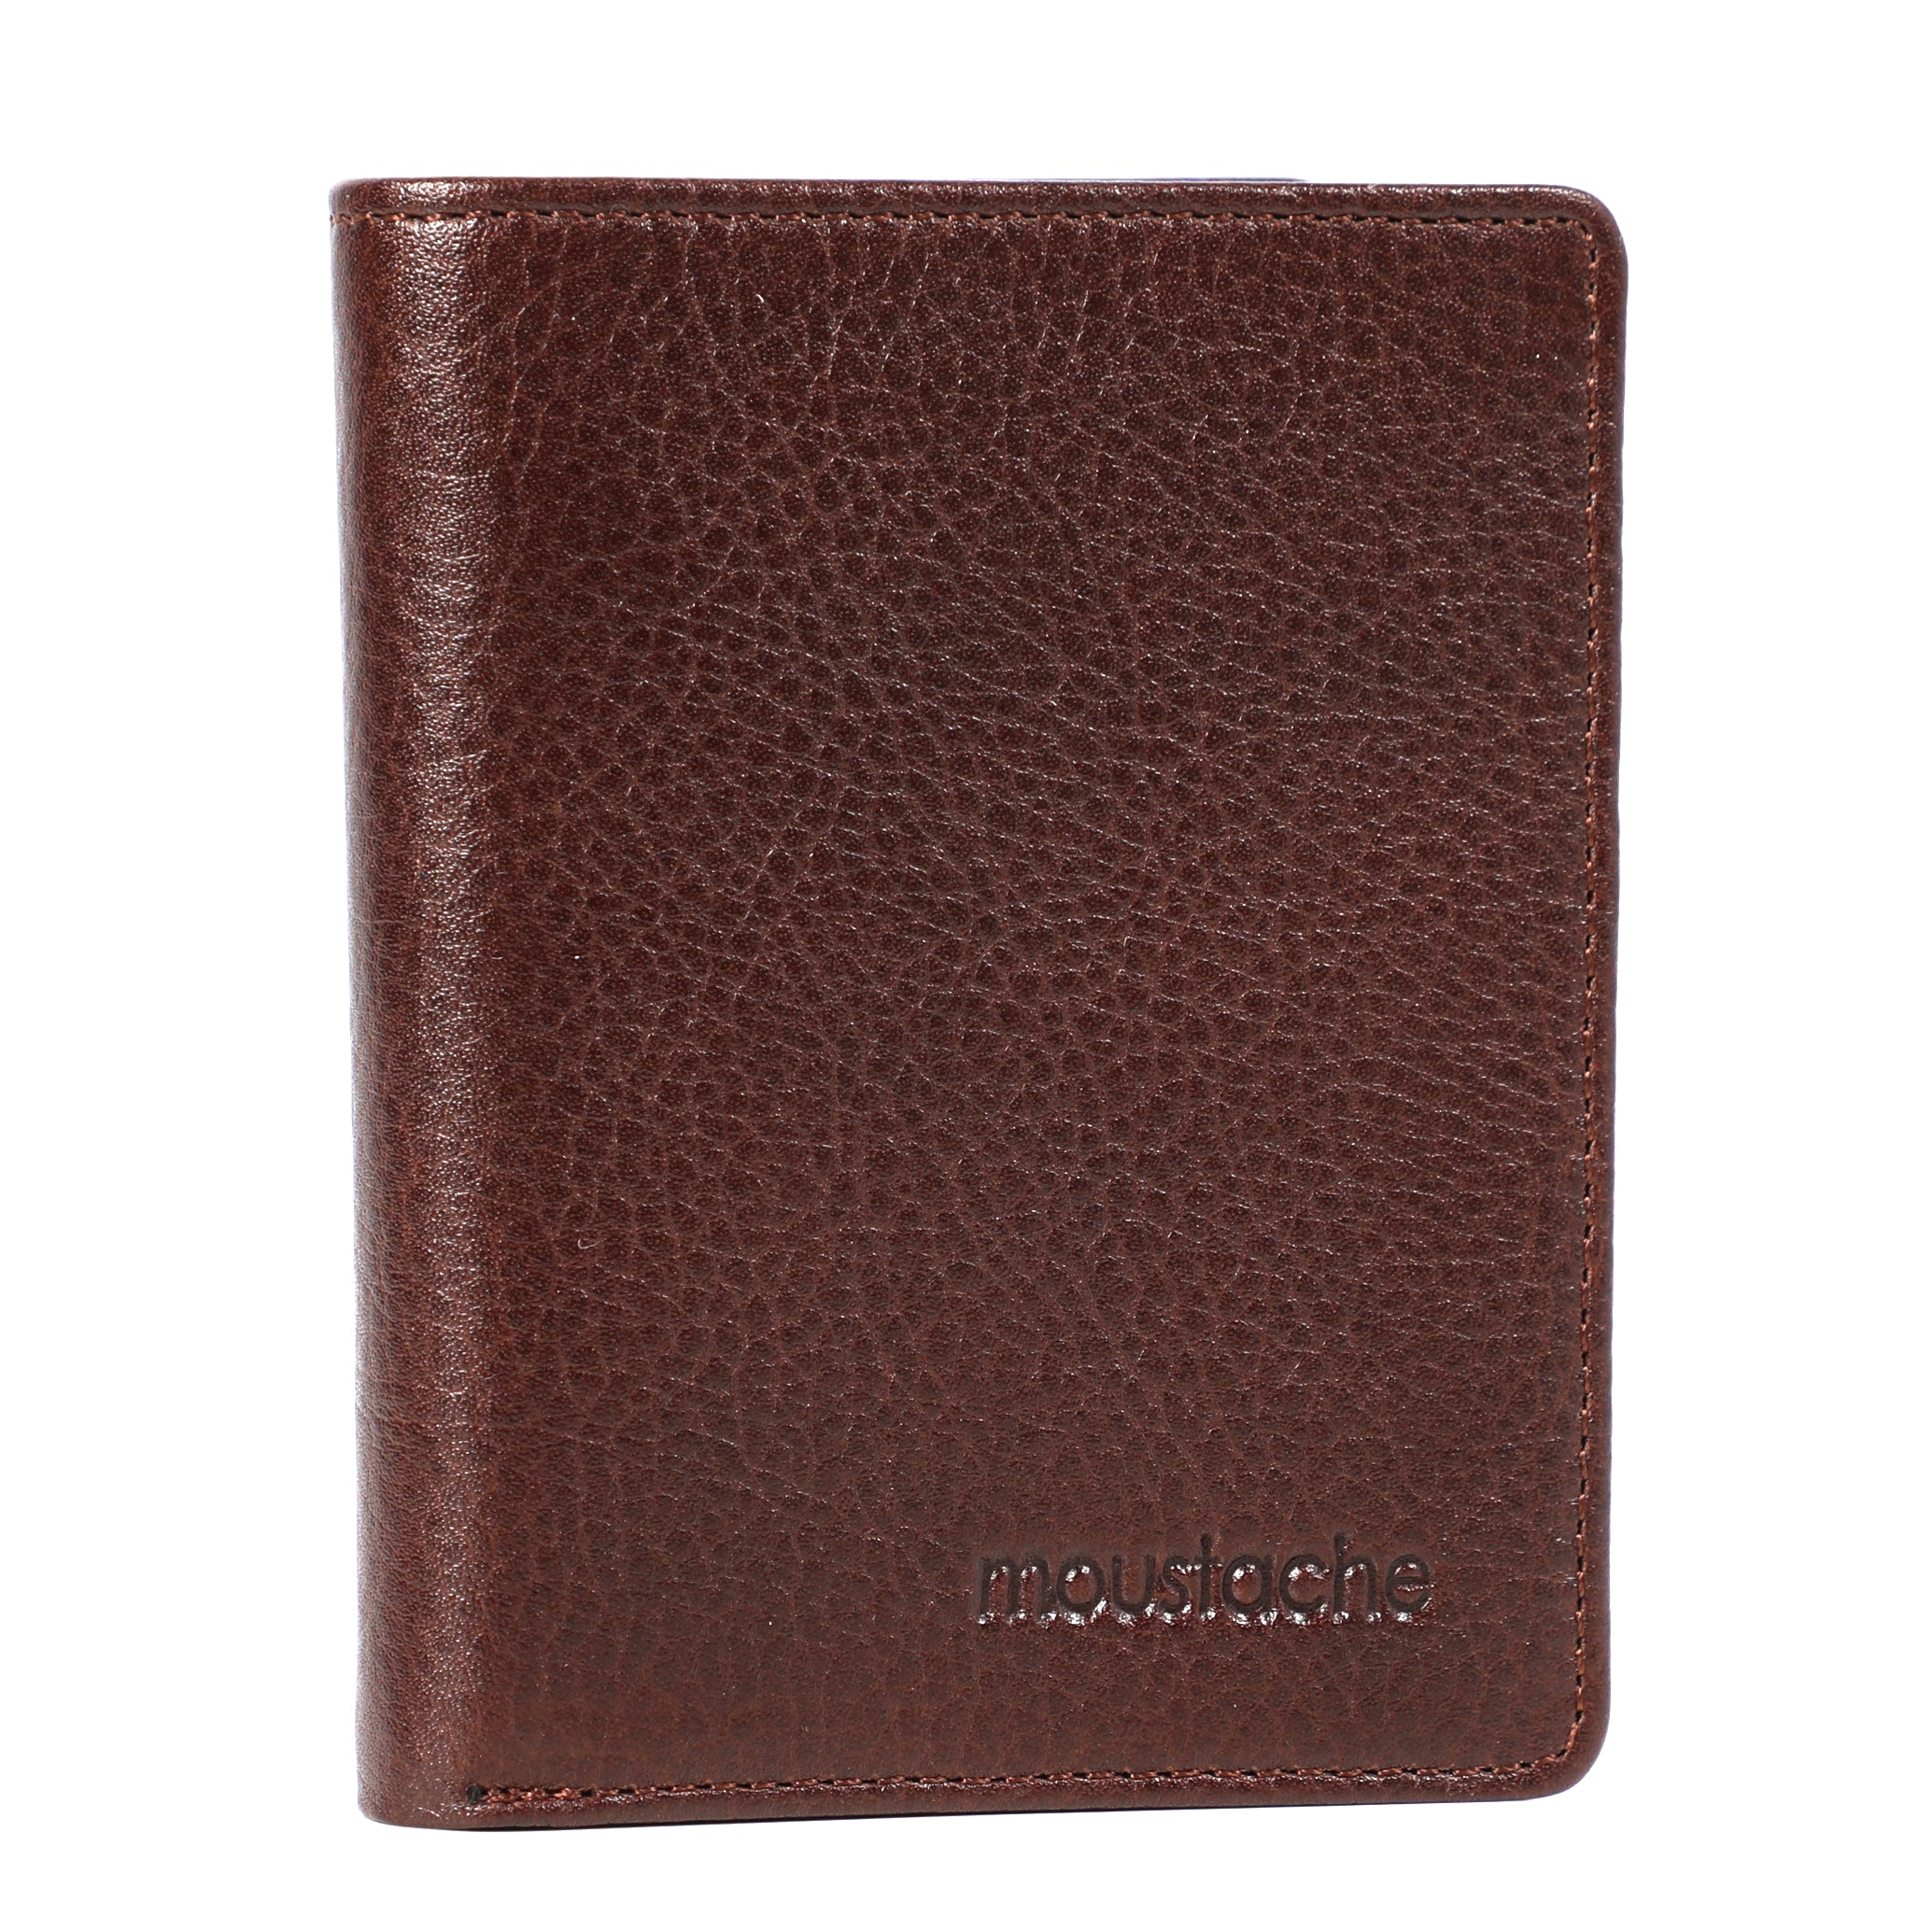 Moustache Brown Leather Wallet With Several Layers